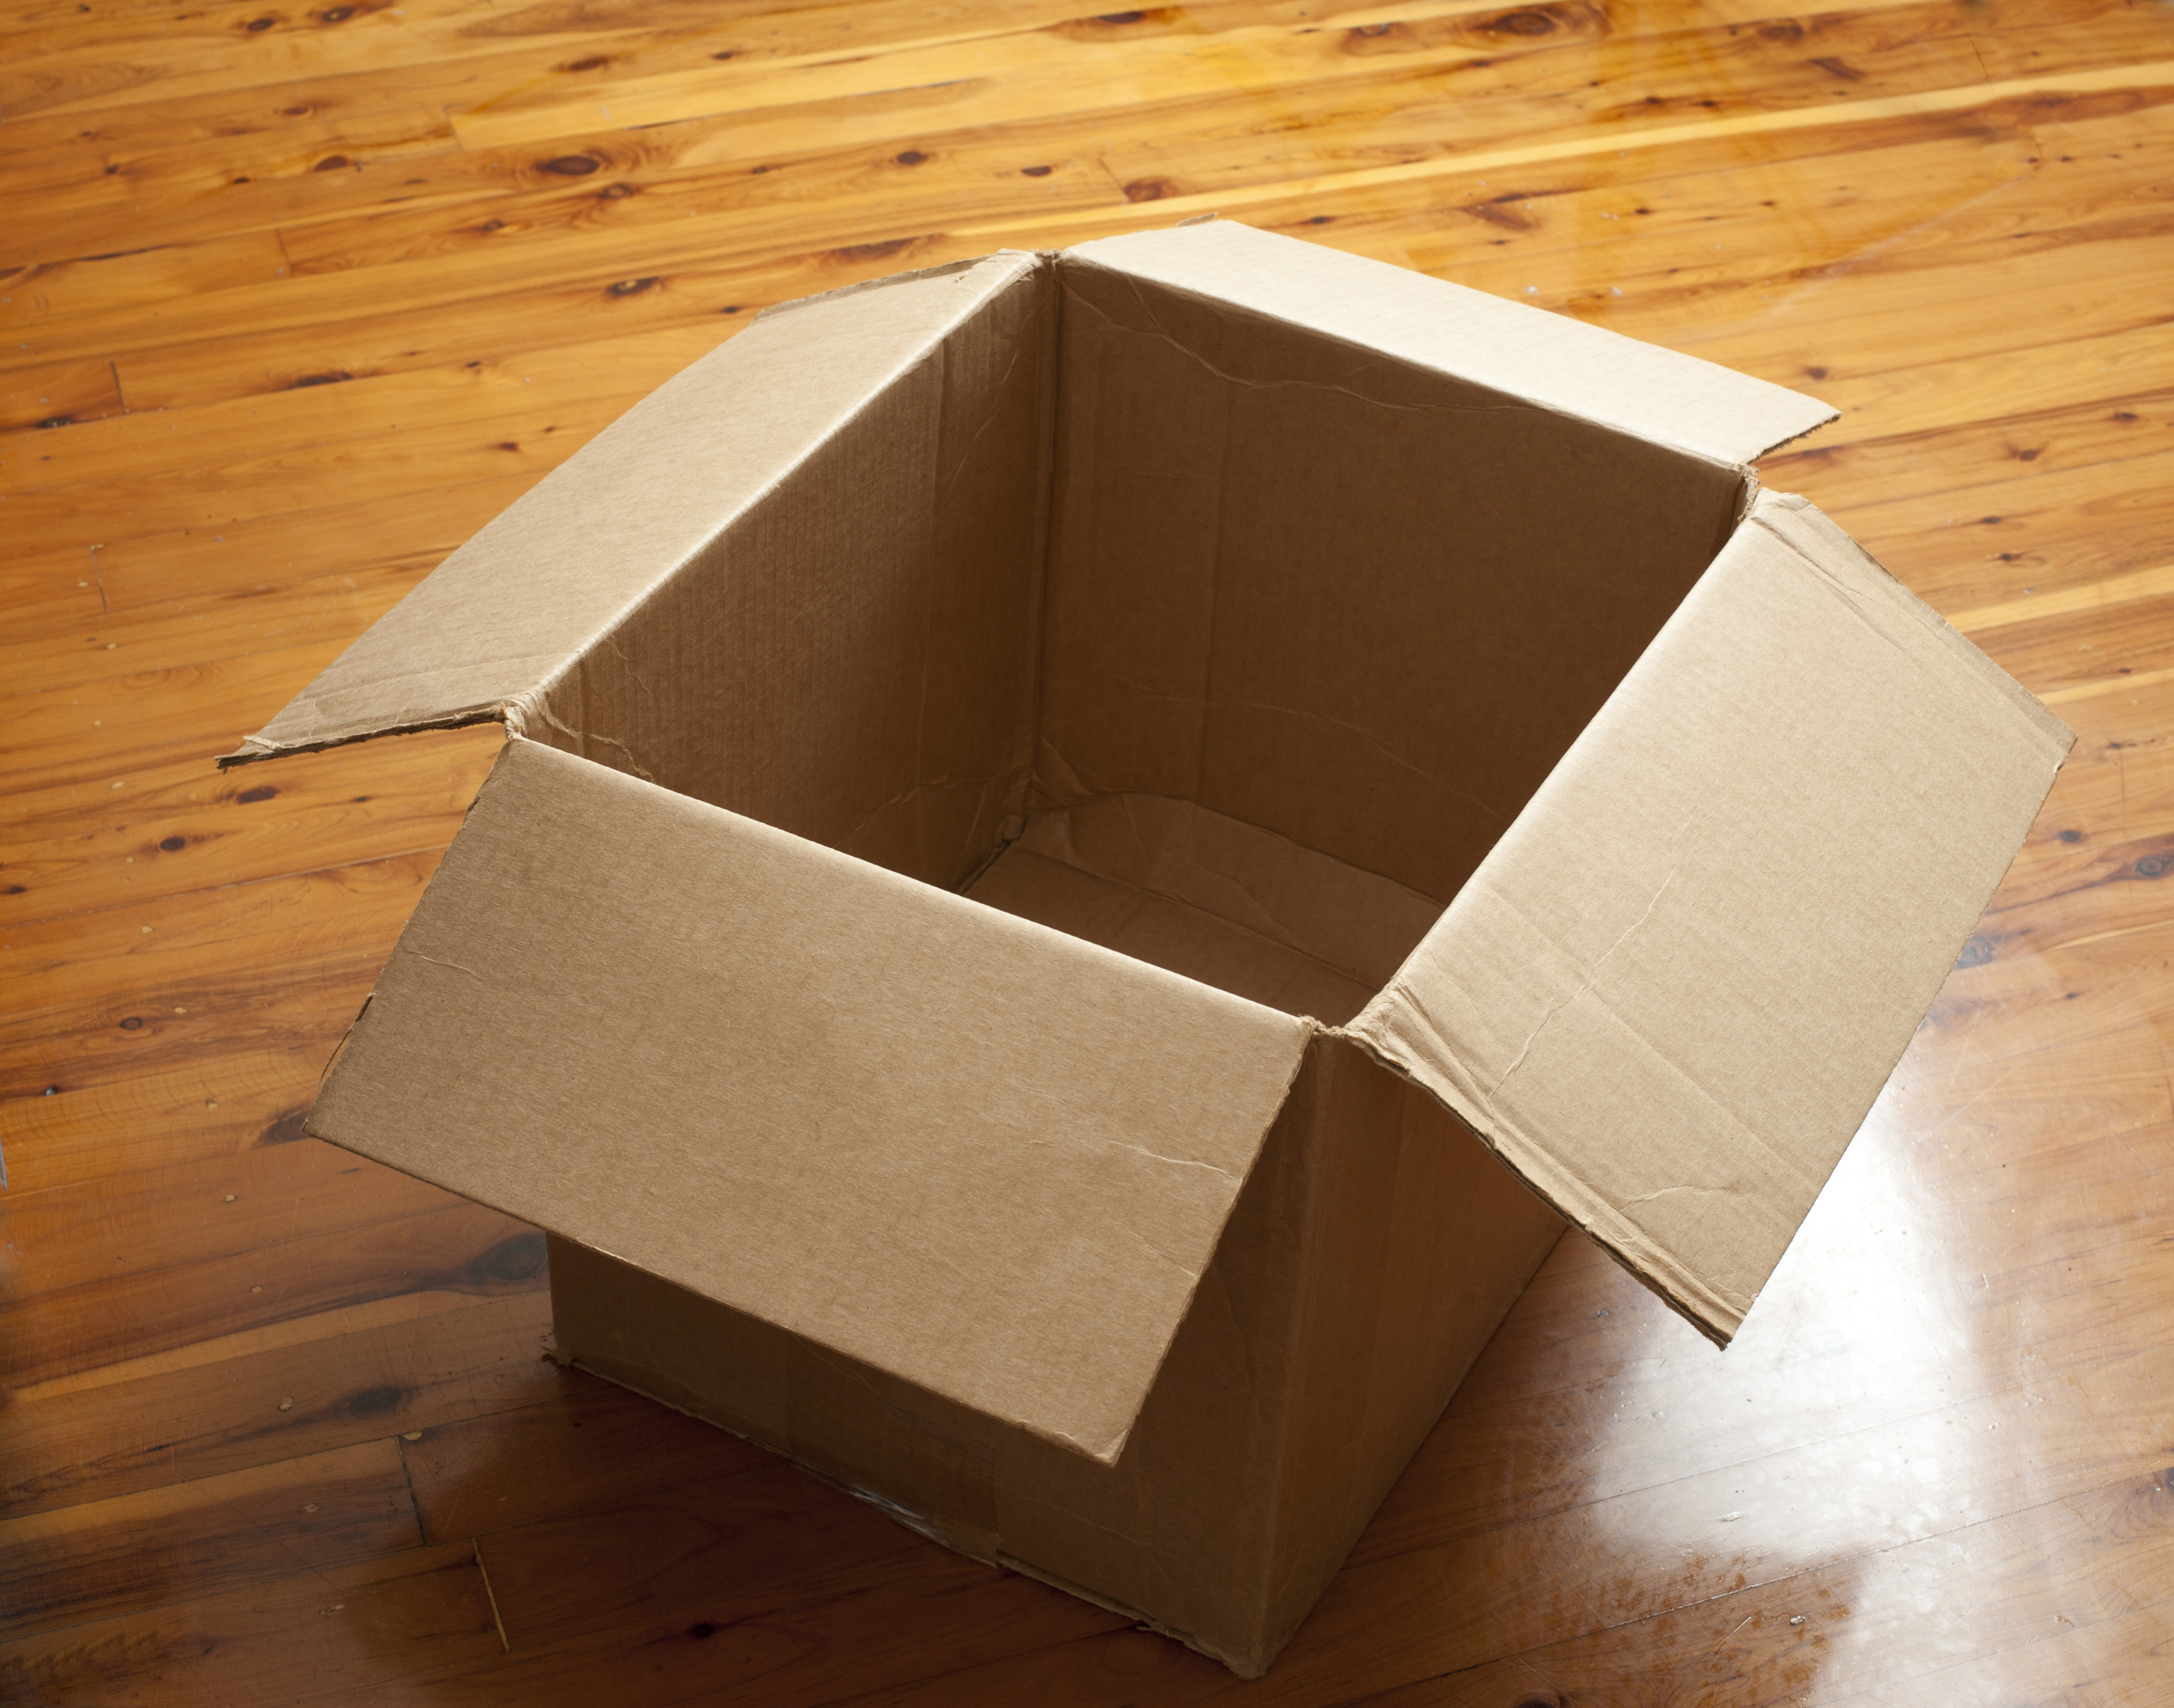 File:Cardboard Boxes and their History.jpg - Wikimedia Commons